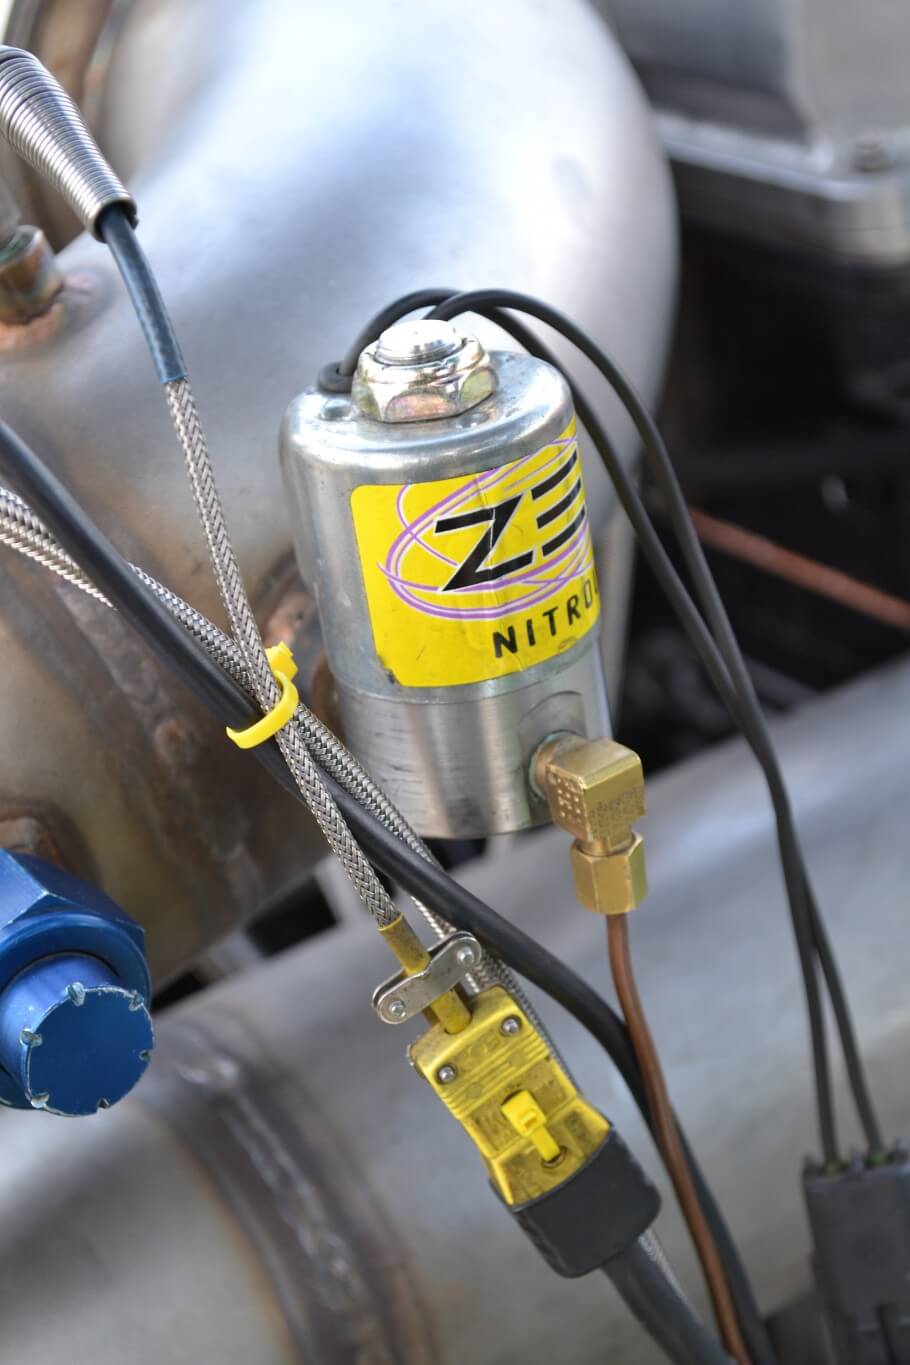 Nitrous is a big "no-no" in sled pulling, so we were surprised to see a ZEX solenoid on the engine. Turns out Matt has a sense of humor, and he actually has it connected to an ether canister, so he can fire up the 12:1 compression Cummins without assistance.